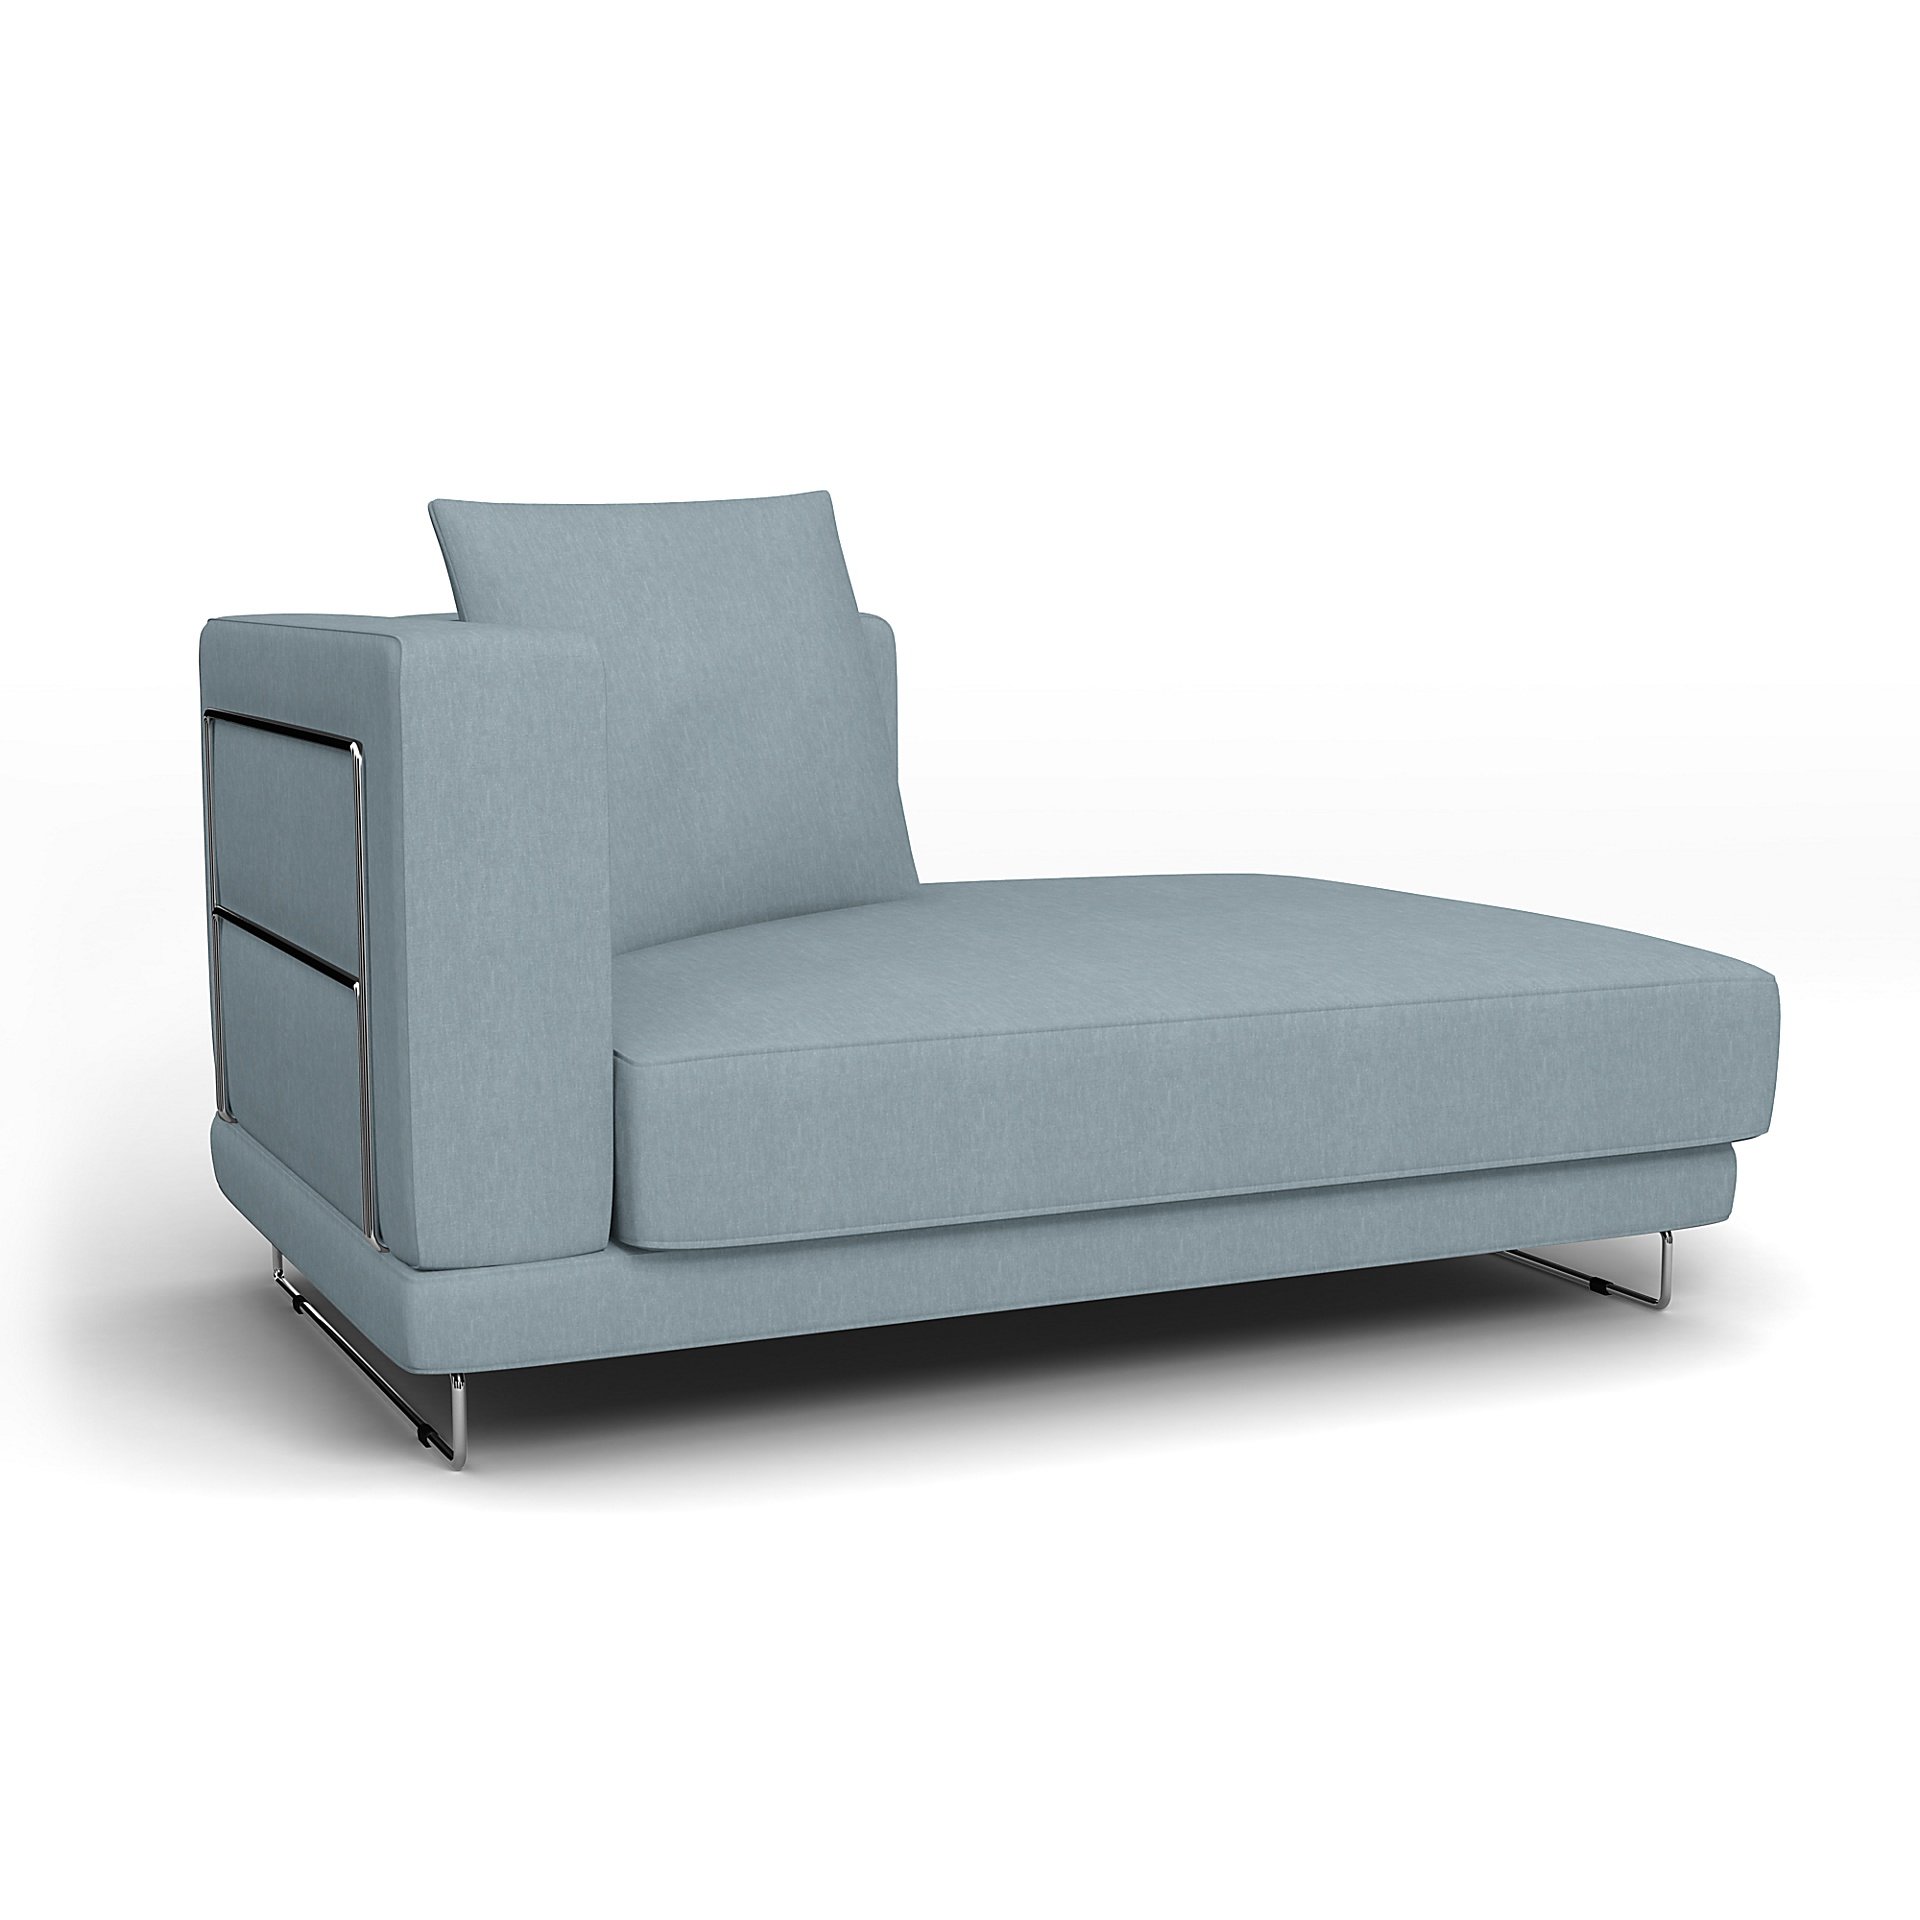 IKEA - Tylosand Chaise with Right Armrest Cover, Dusty Blue, Linen - Bemz